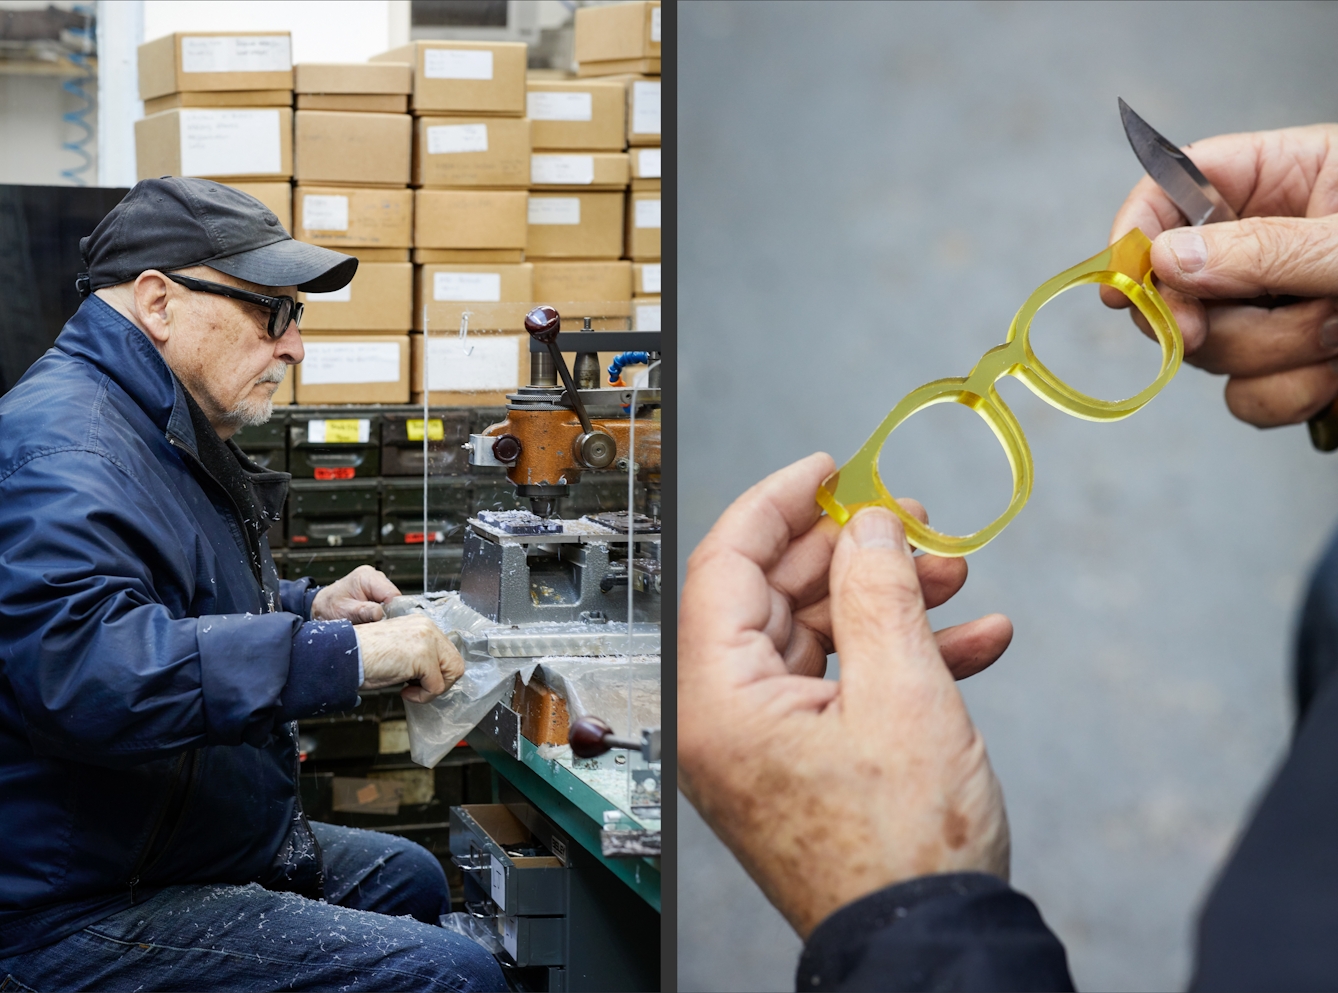 Photographic diptych. The image on the left shows an older man sat at a workbench controlling a milling machine. He is wearing a blue jacket and a black cap. The image on the right shows the hands of the same man holding a pair of unfinished yellow acetate spectacle frames.